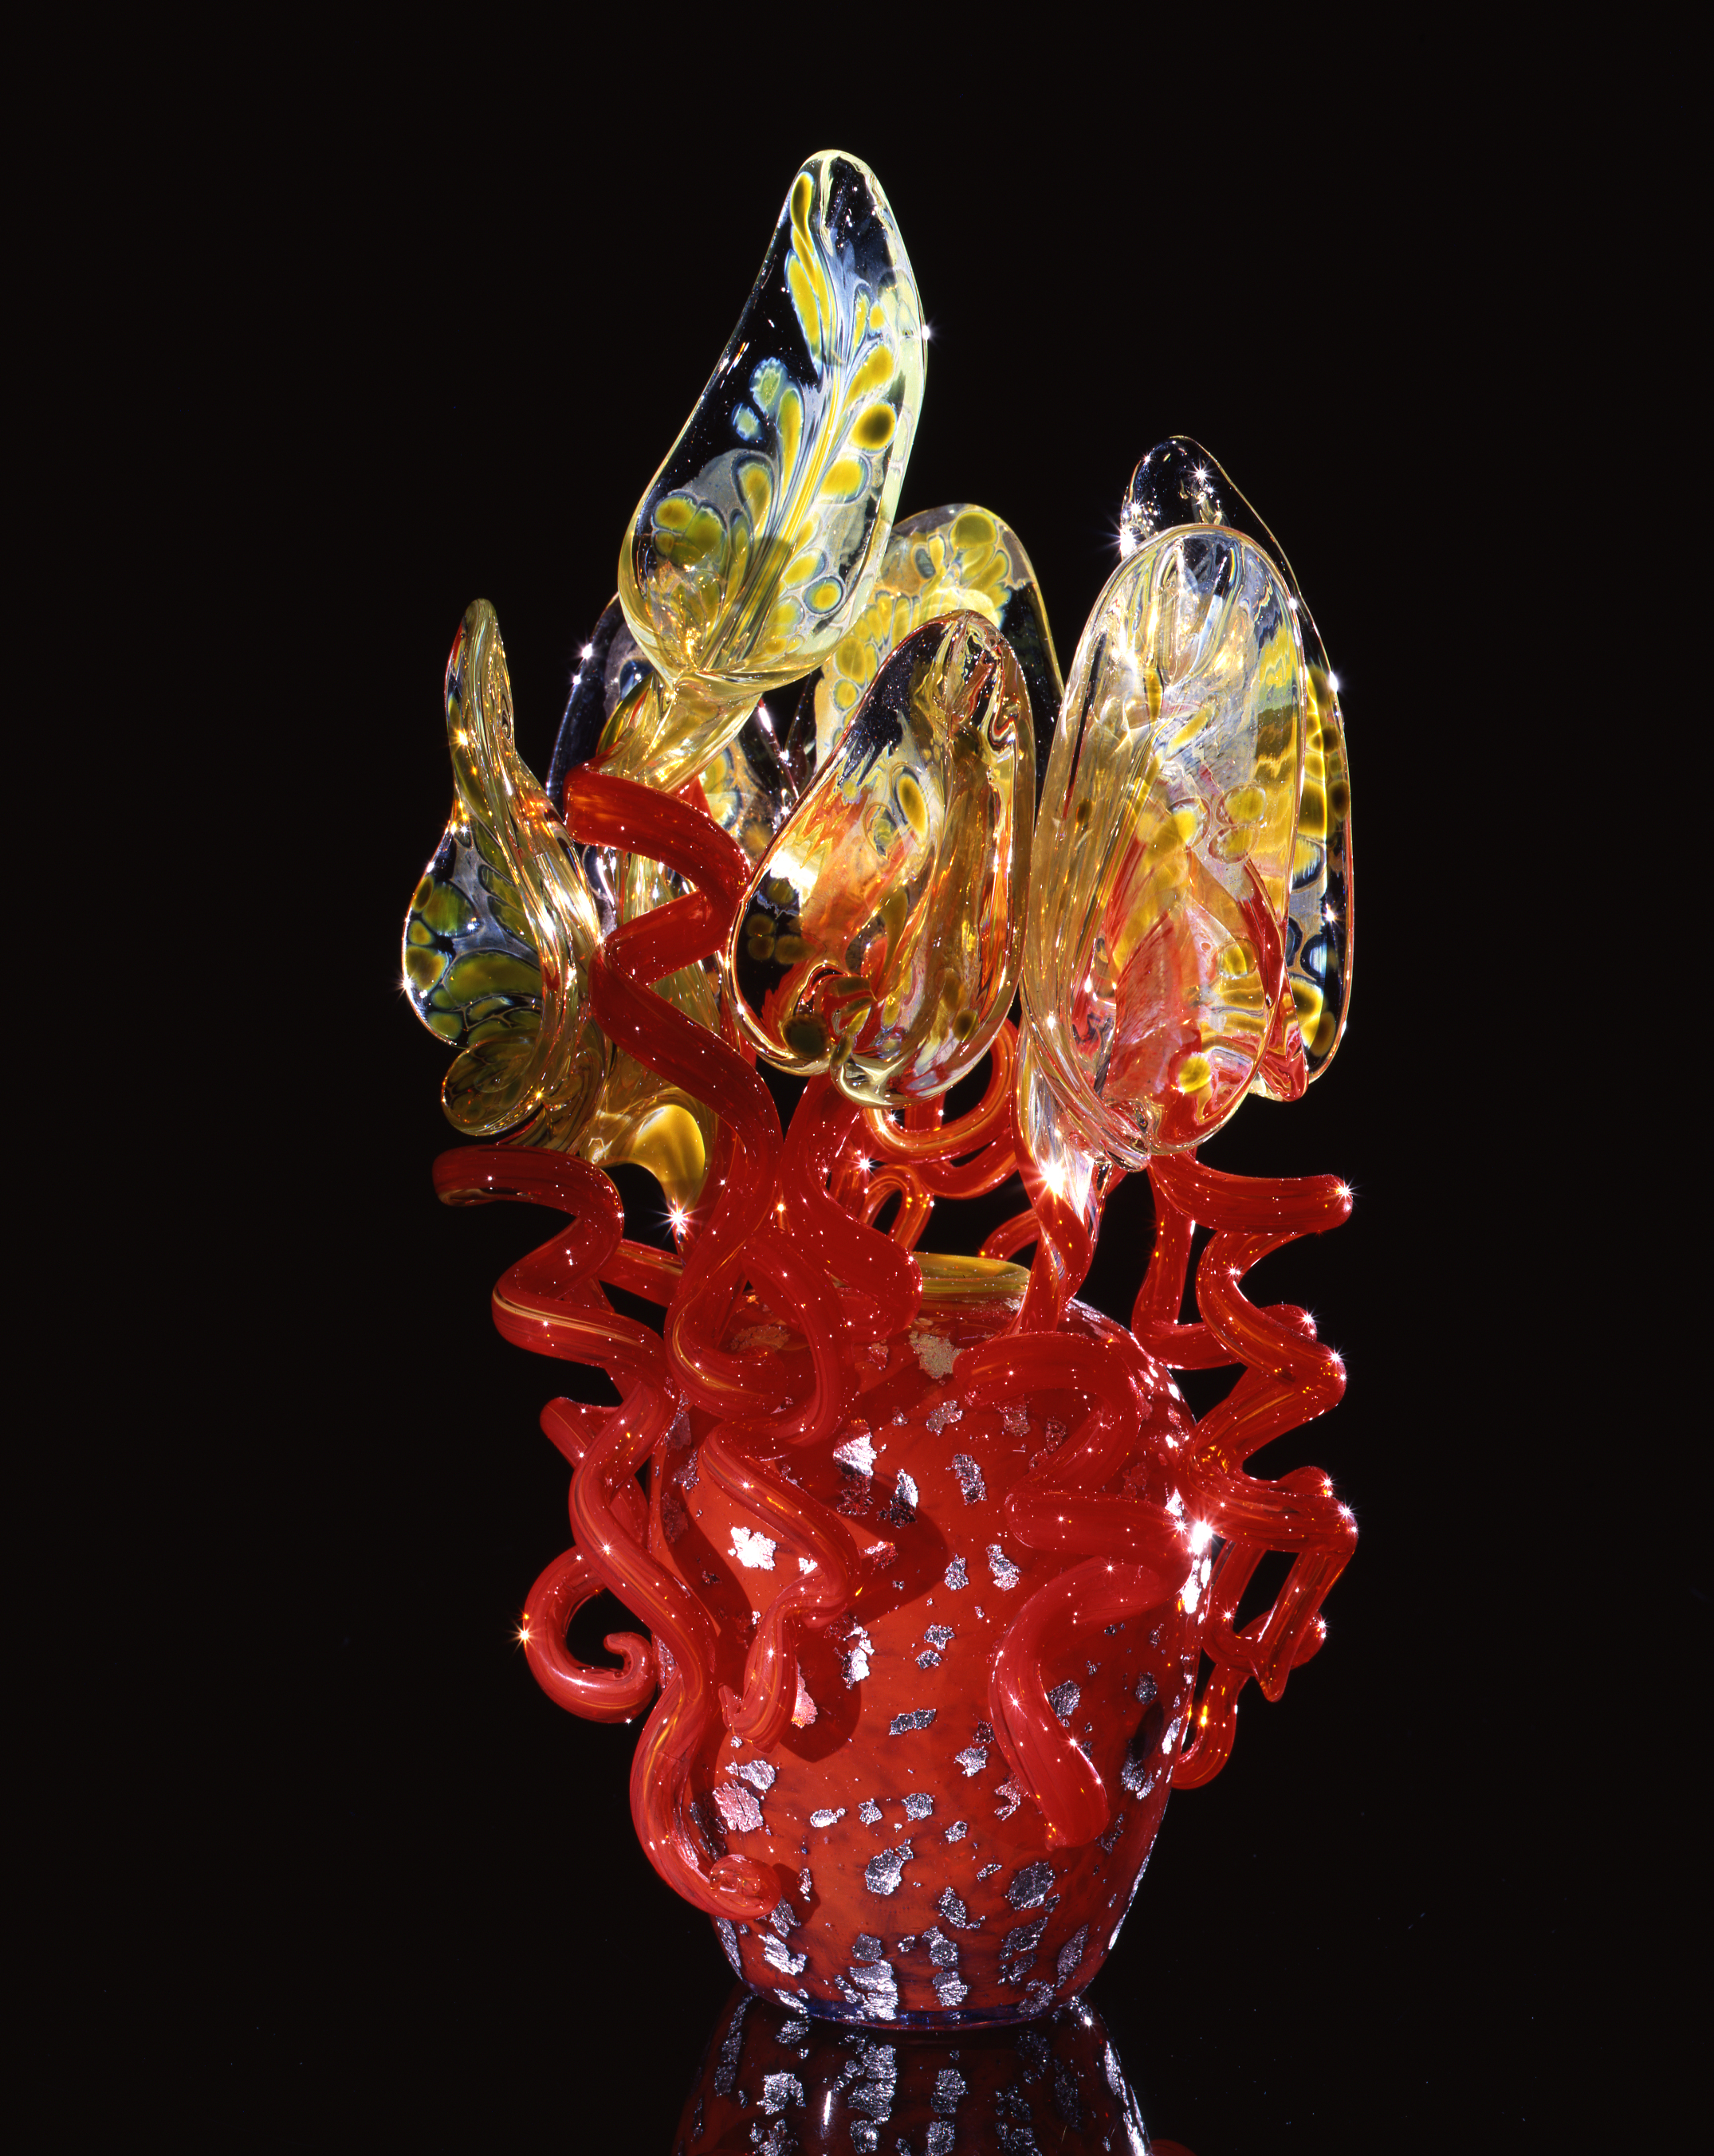  Dale Chihuly,&nbsp; Cadmium Red Piccolo Venetian with Translucent Lilies&nbsp; (1993, glass, 12 x 6 x 5&nbsp;inches) 